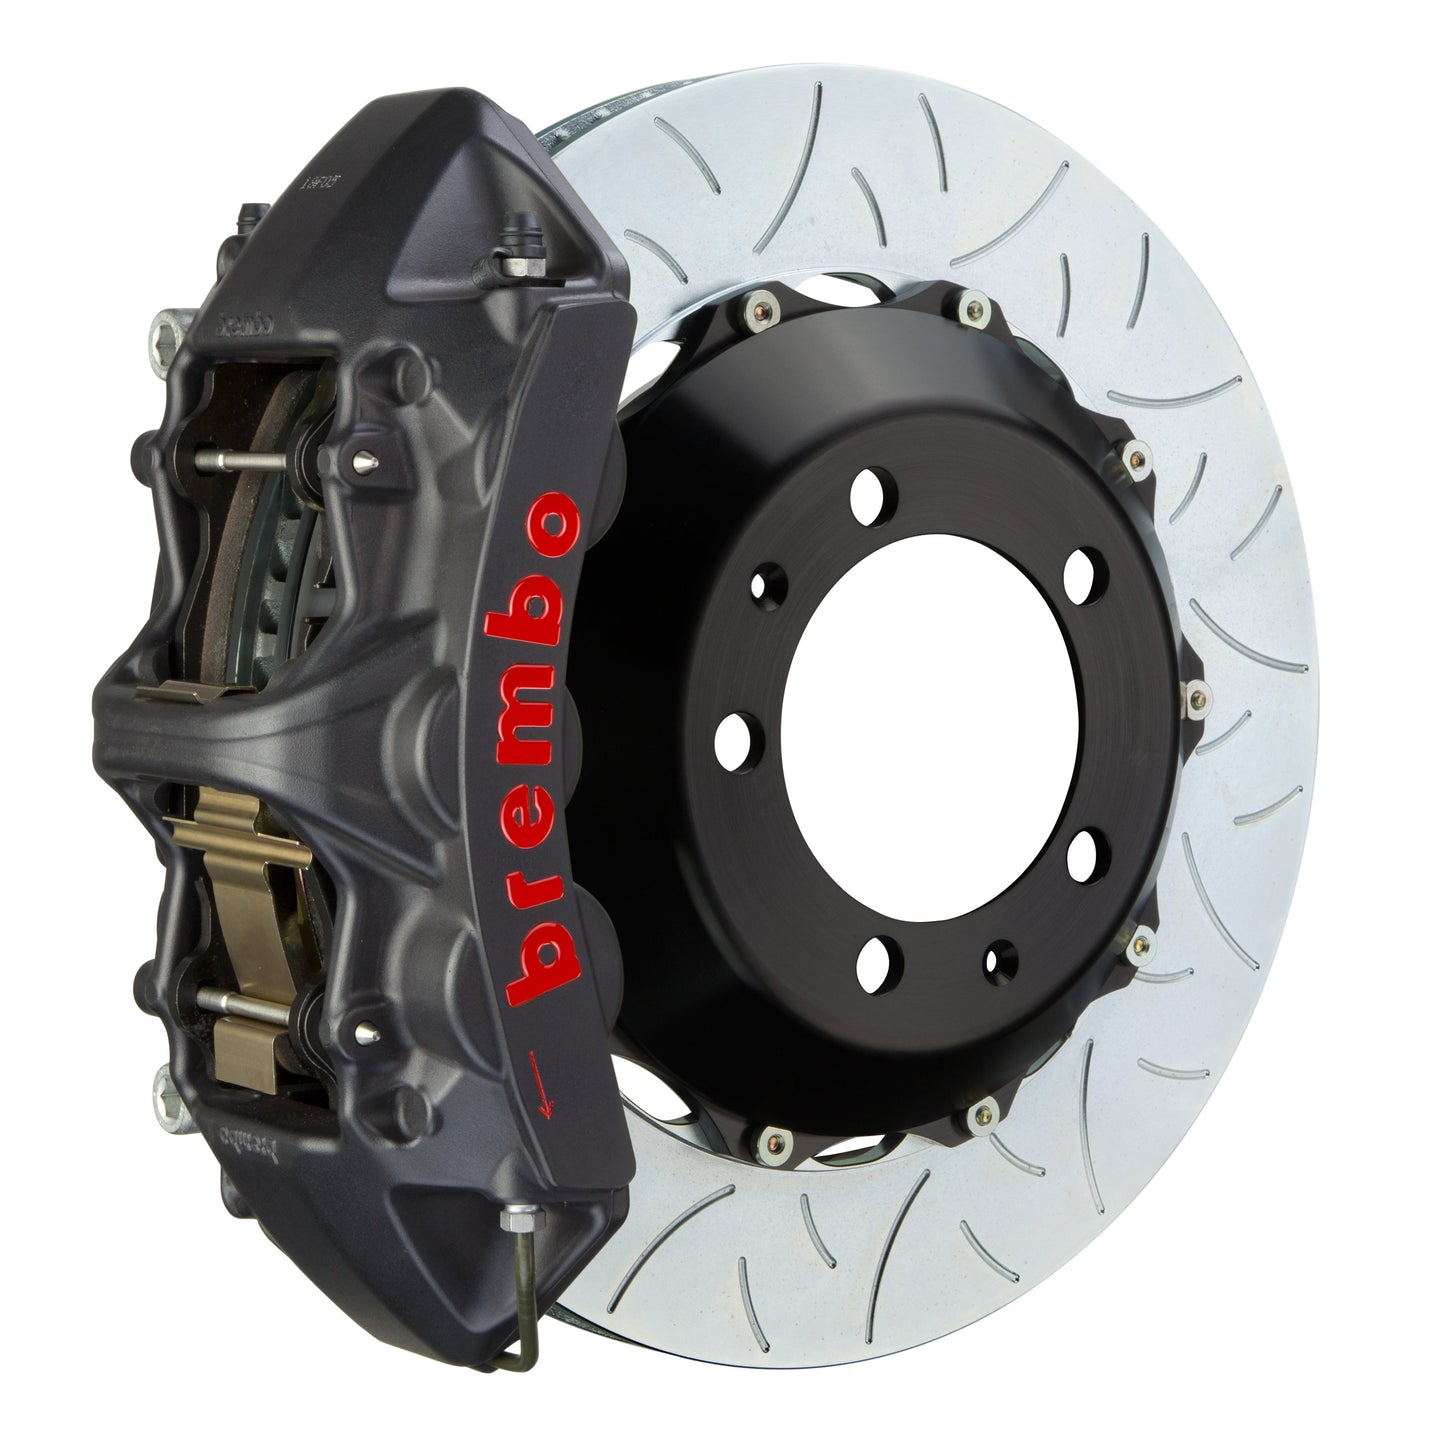 Front Brembo Gran Turismo Braking Upgrade Kit (1M18011AS) GT / S6 Caliper with 6-Pistons & 2-piece 355x32 Disc